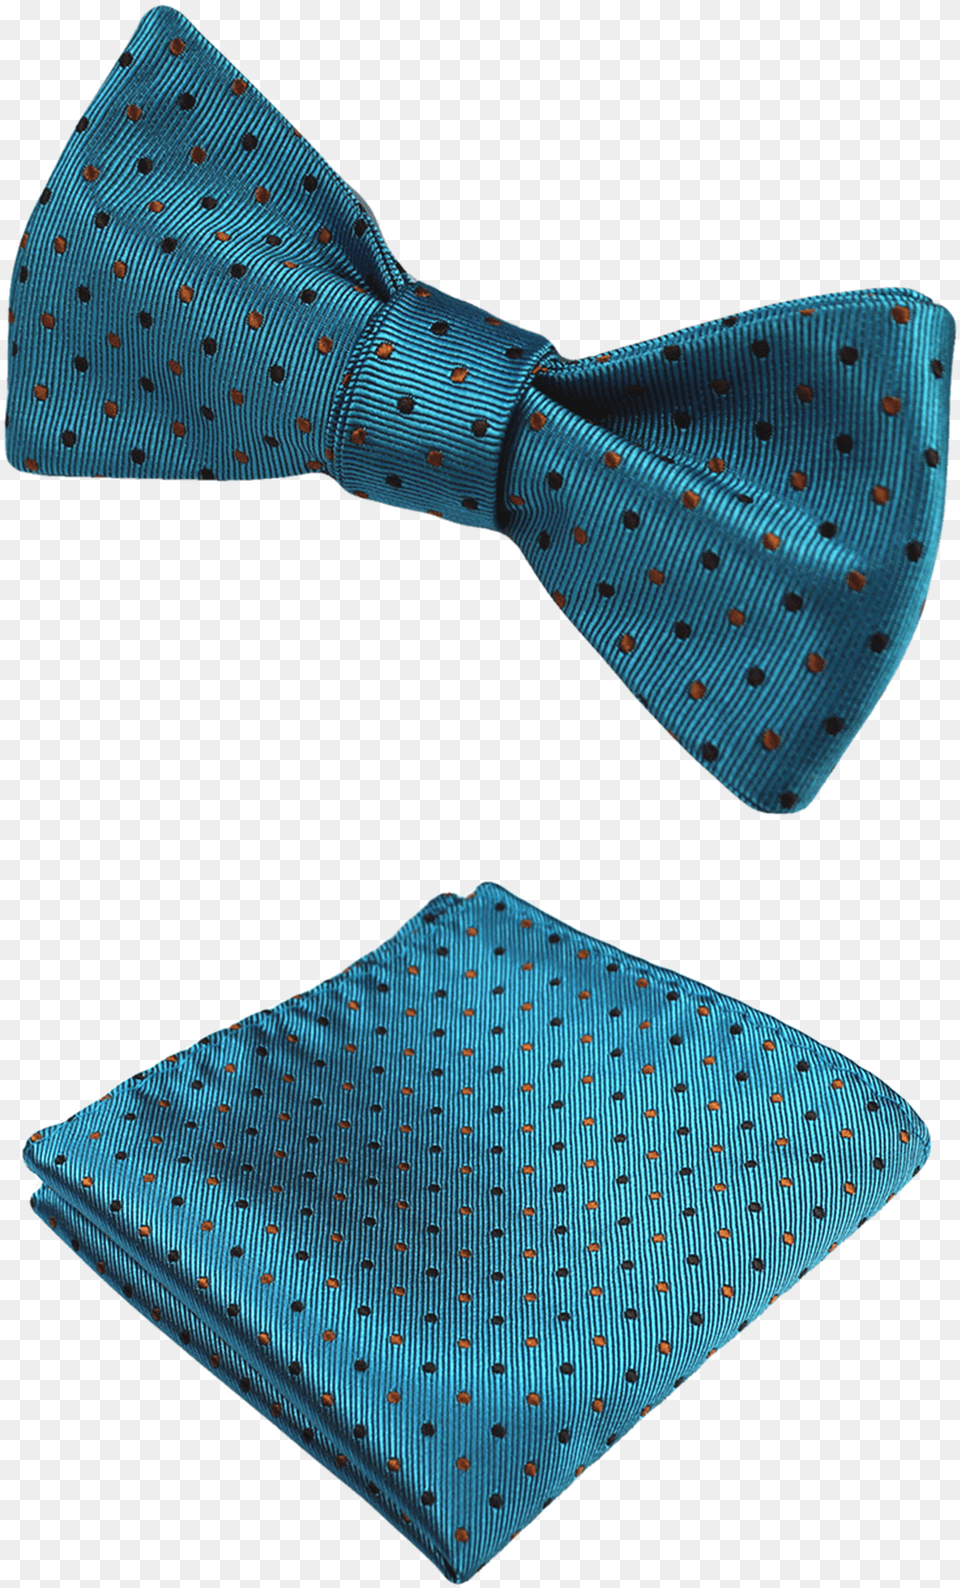 Teal Black Amp Gold Bow Tie And Pocket Square Polka Dot, Accessories, Formal Wear, Necktie, Bow Tie Free Png Download